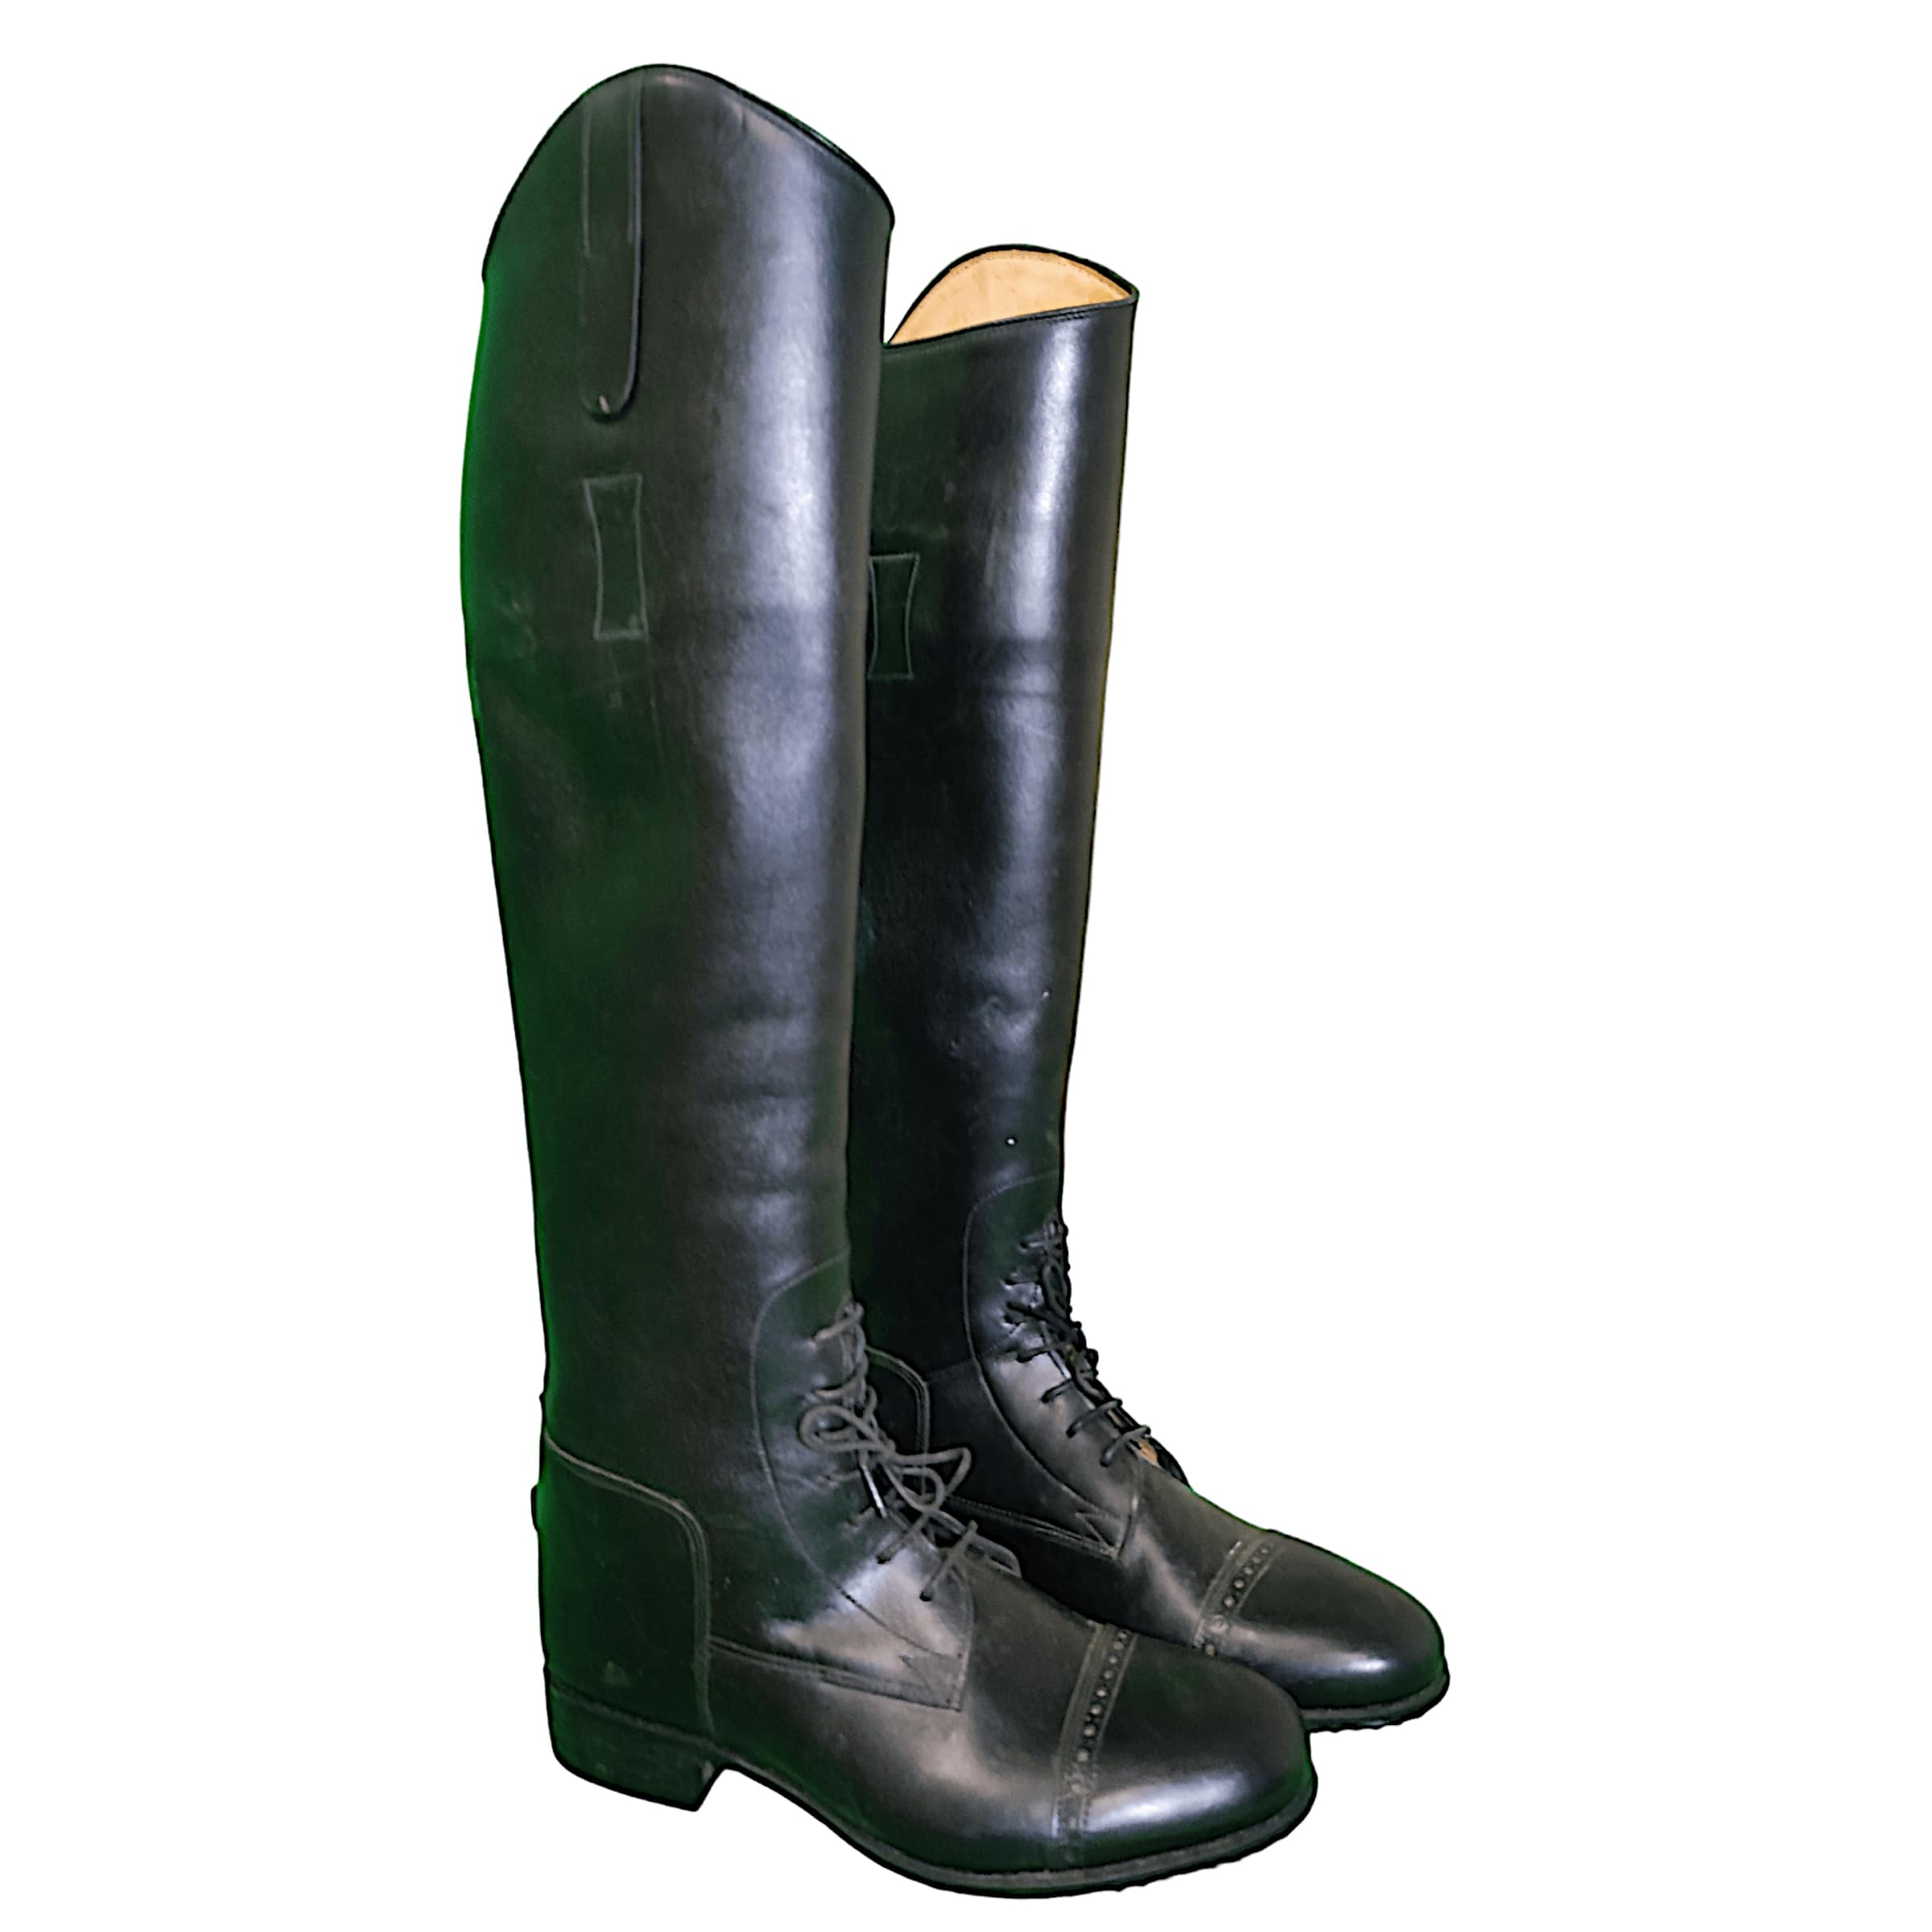 KHS EXCHANGE Vogel Black Leather Tall Field Boots